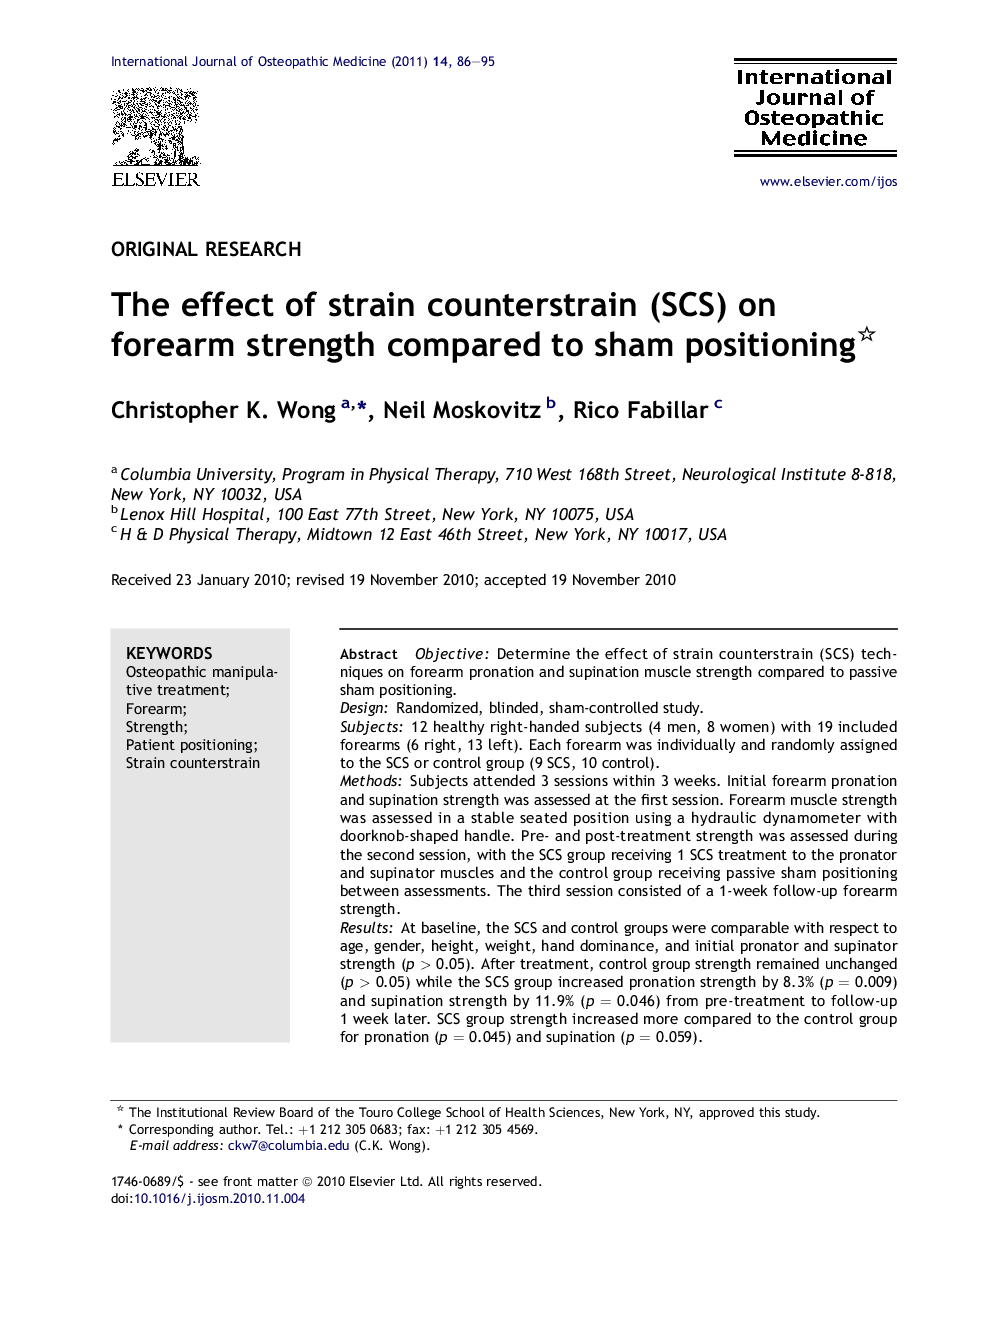 The effect of strain counterstrain (SCS) on forearm strength compared to sham positioning 